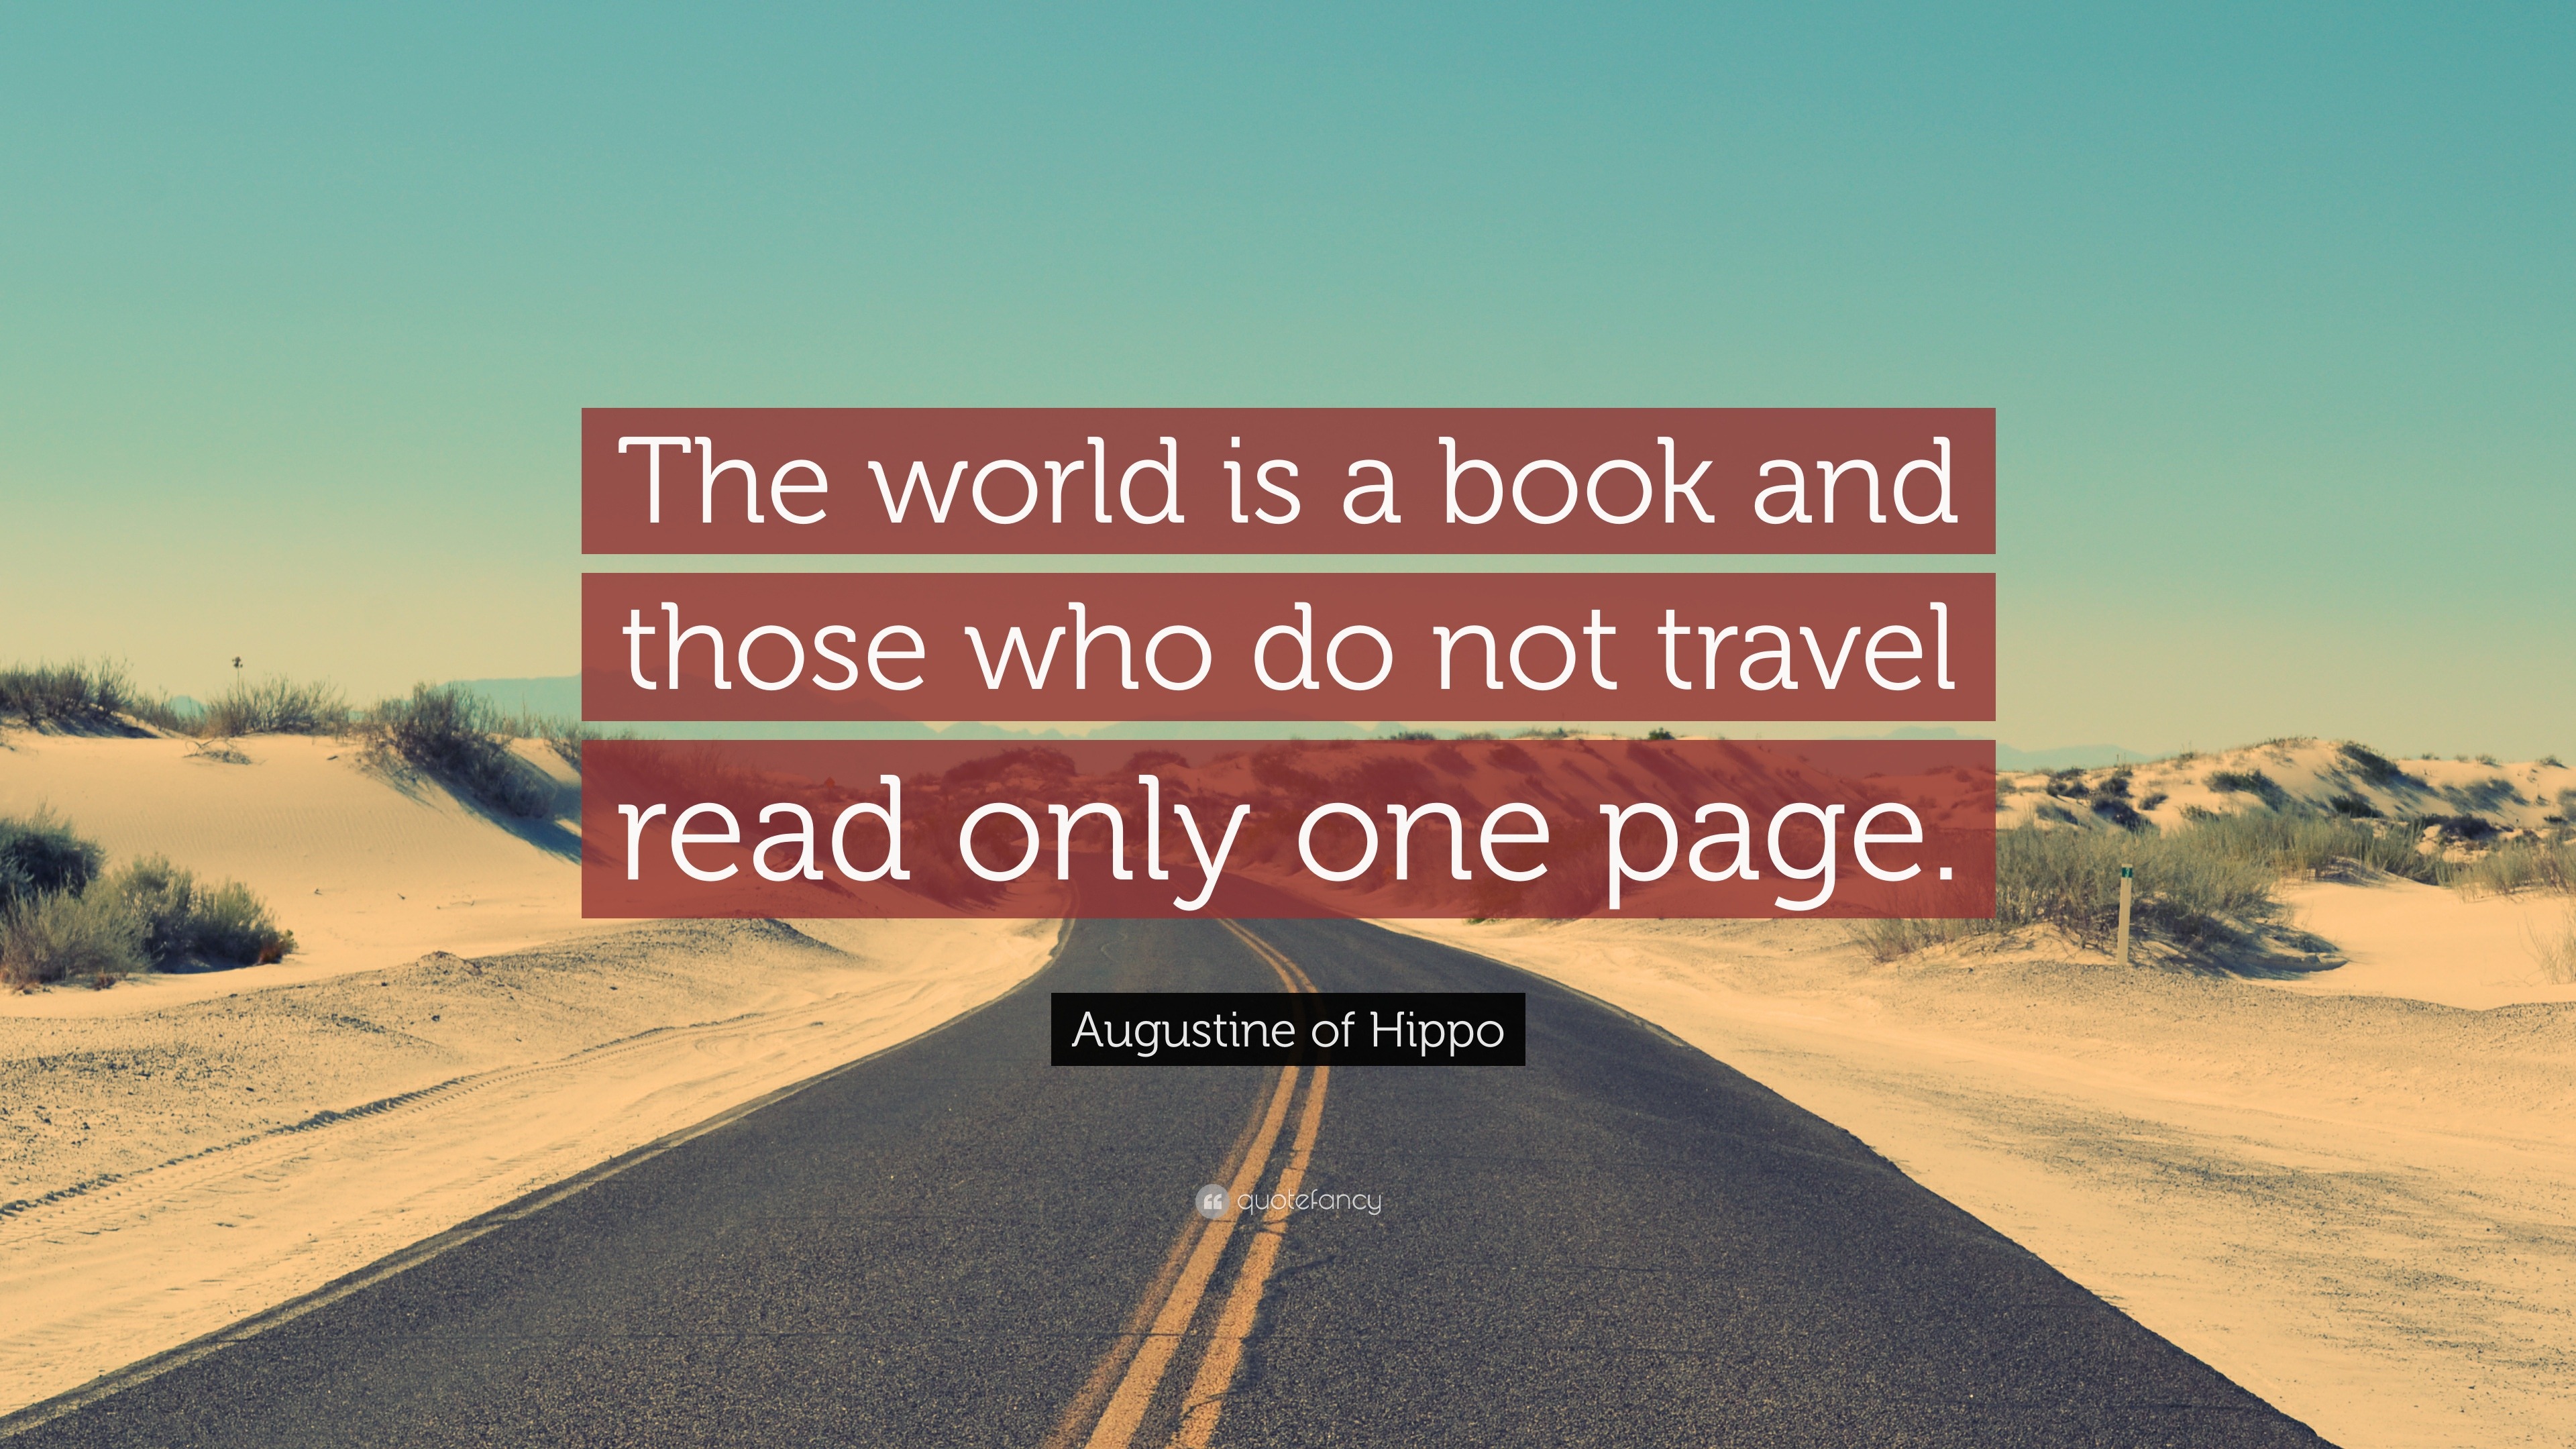 The world is a book, and those who do not travel read only one page.”